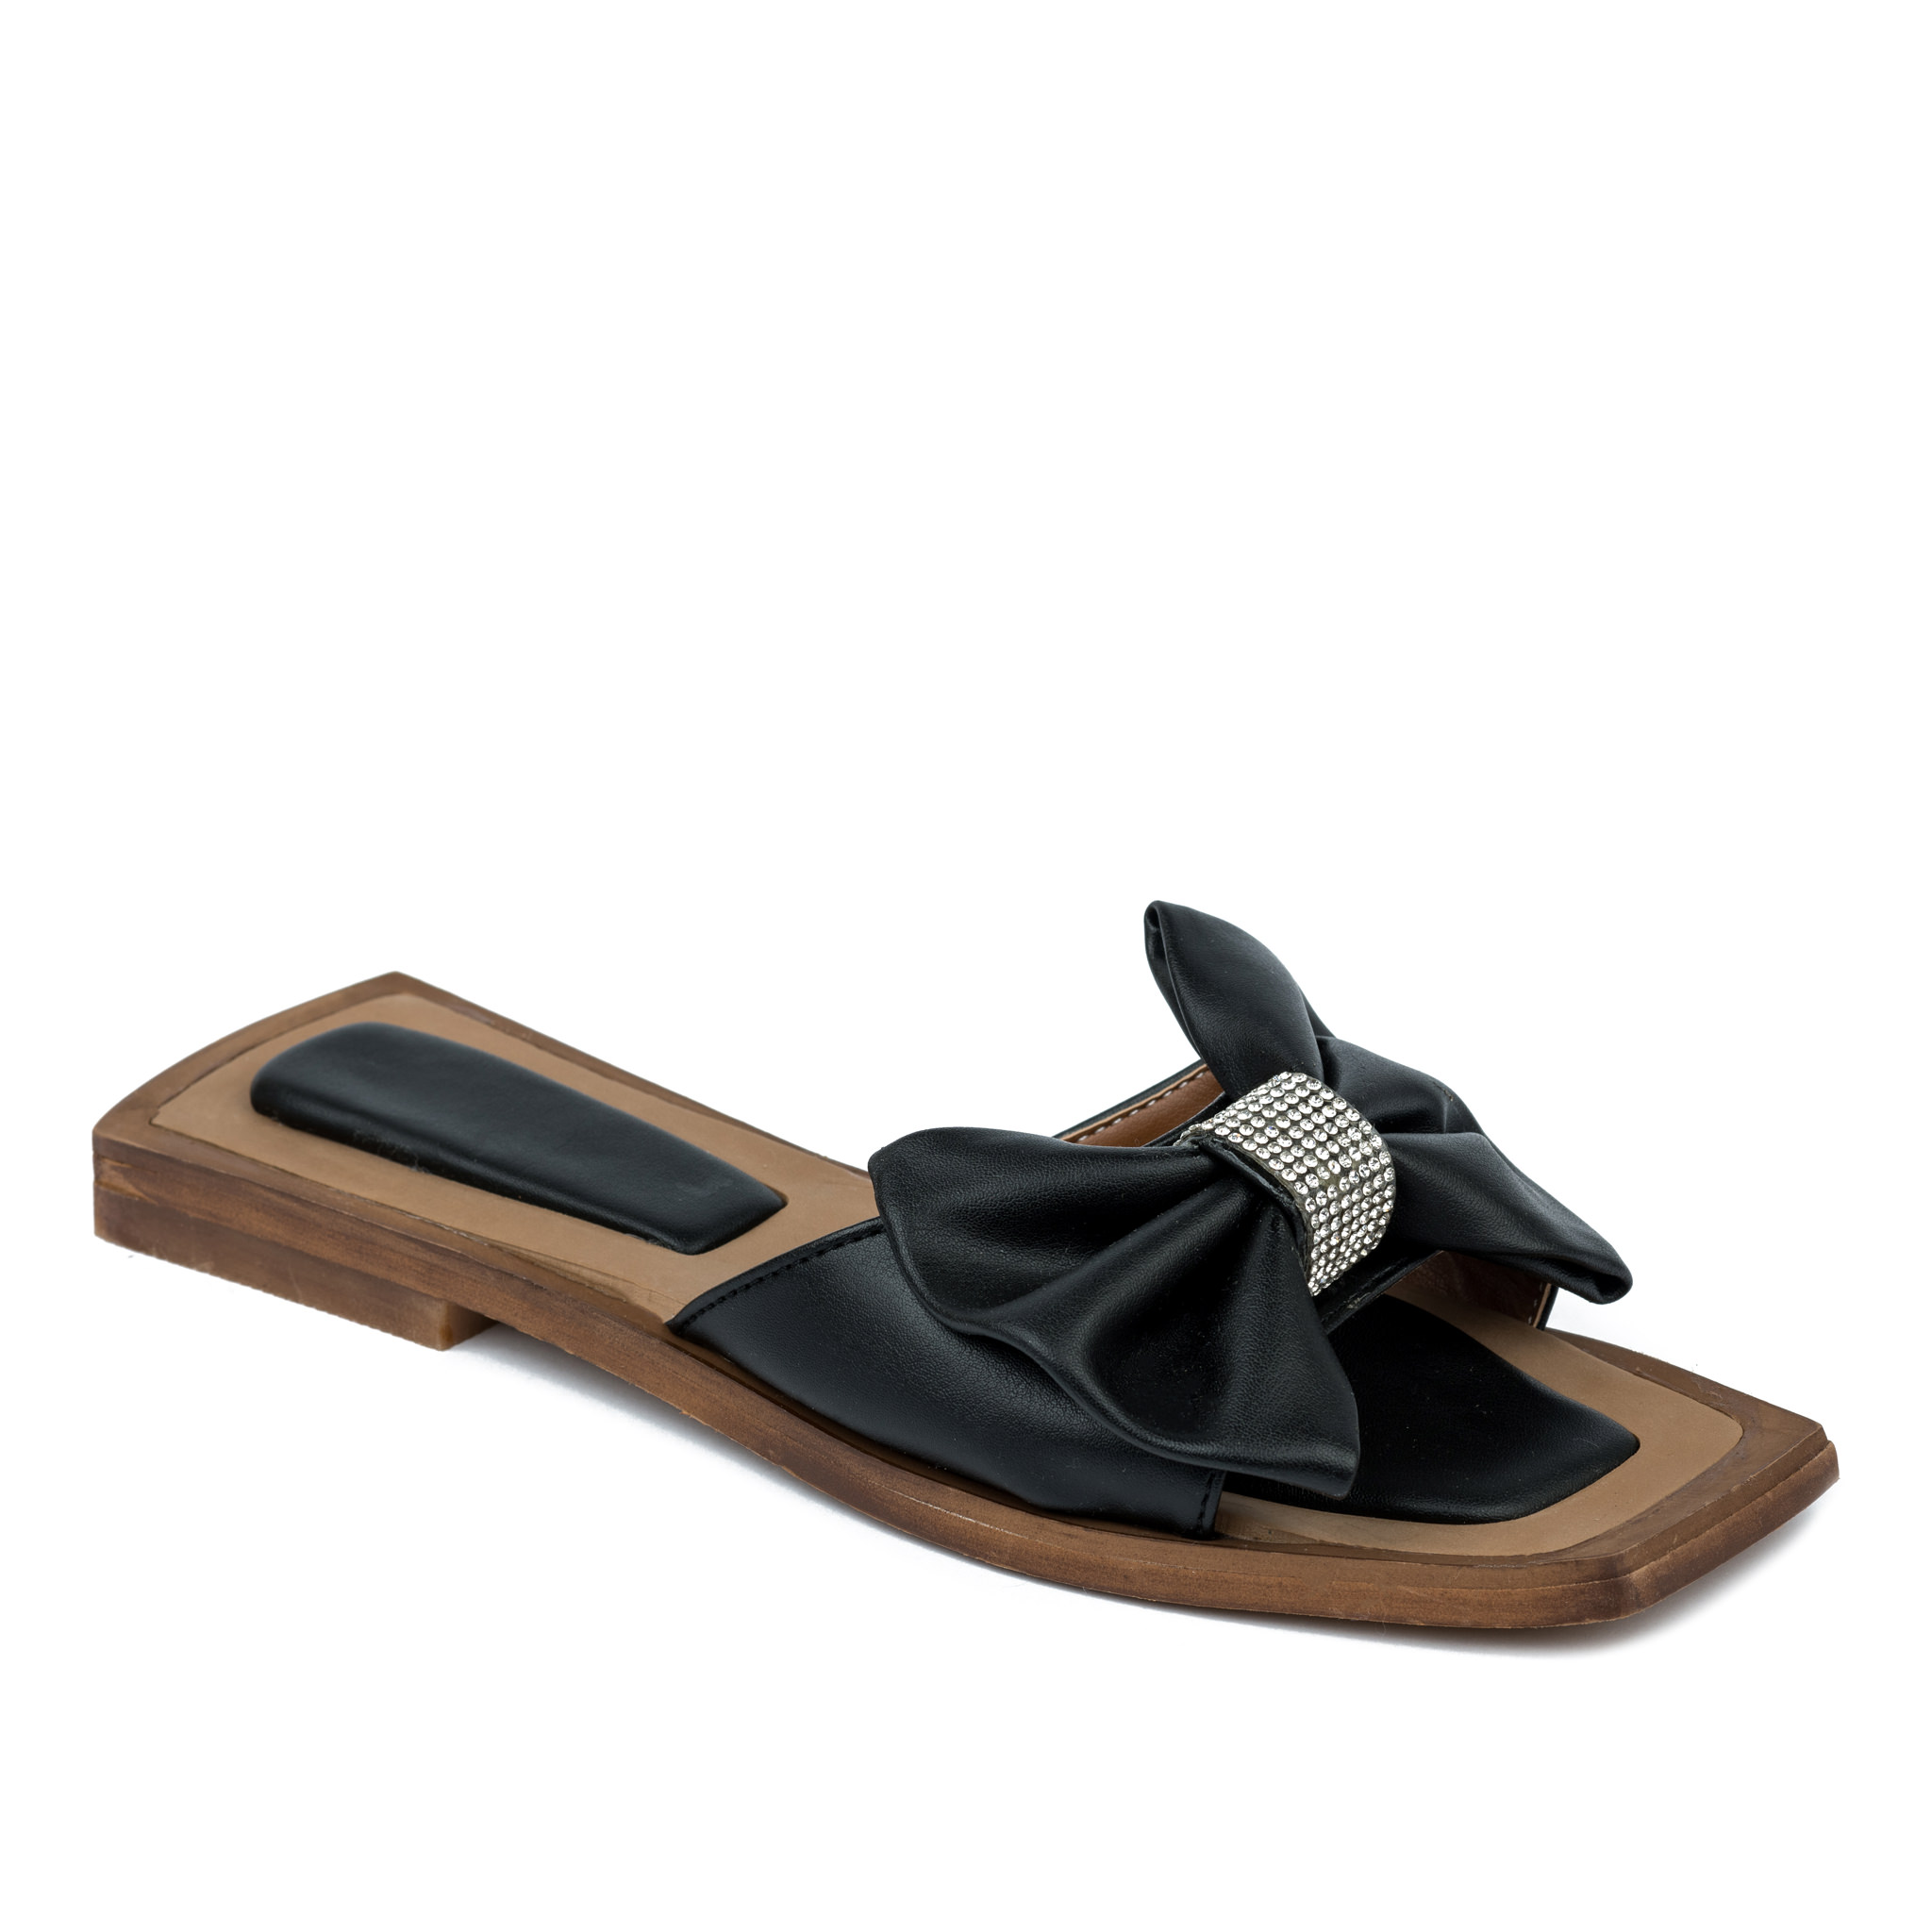 Women Slippers and Mules A422 - BLACK